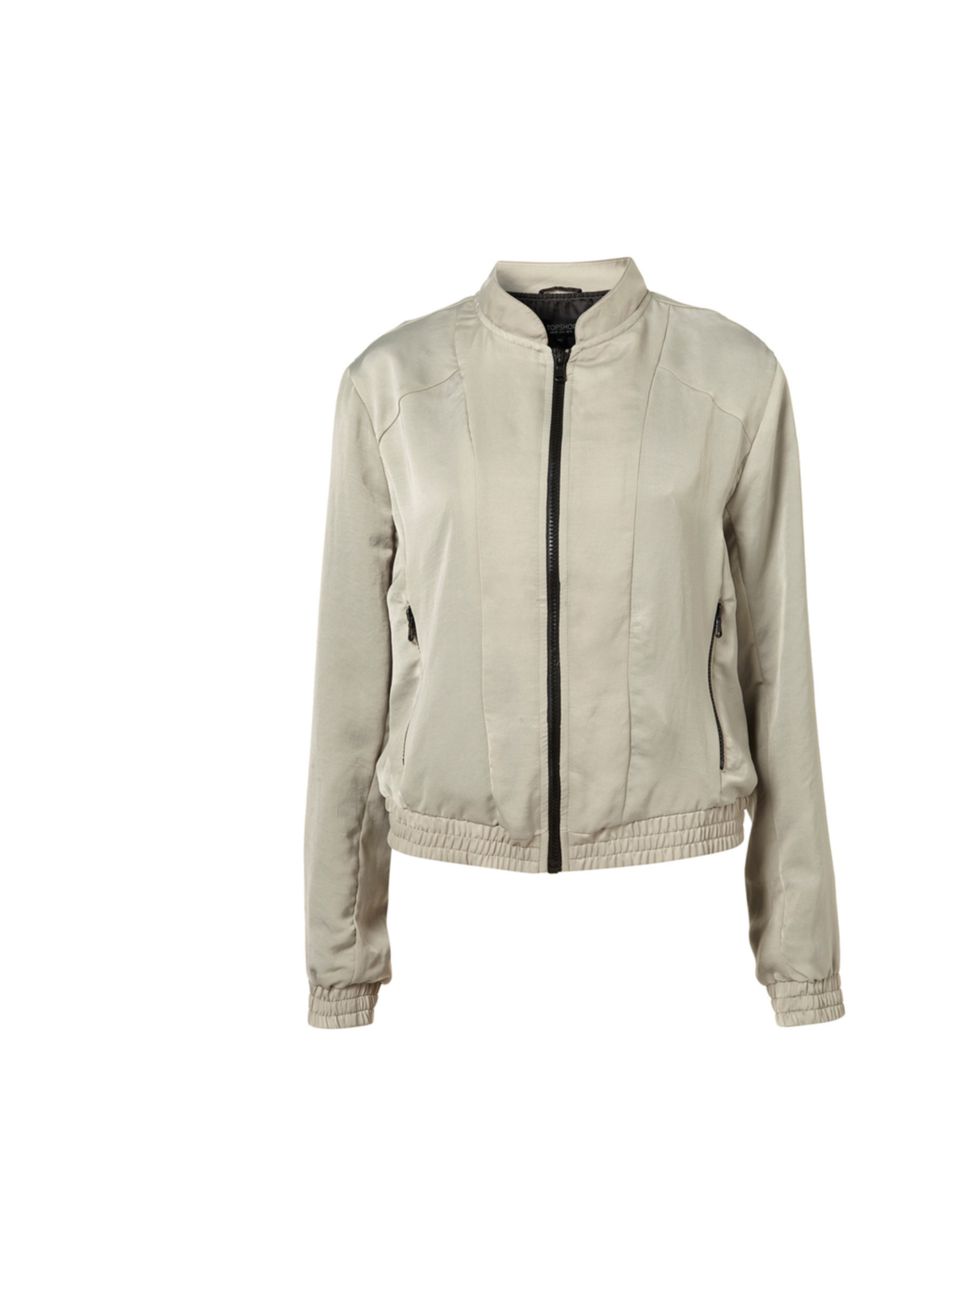 <p>Topshop stone coloured bomber, £42</p><p><a href="http://shopping.elleuk.com/browse?fts=topshop+soft+seamed+bomber">BUY NOW</a></p>